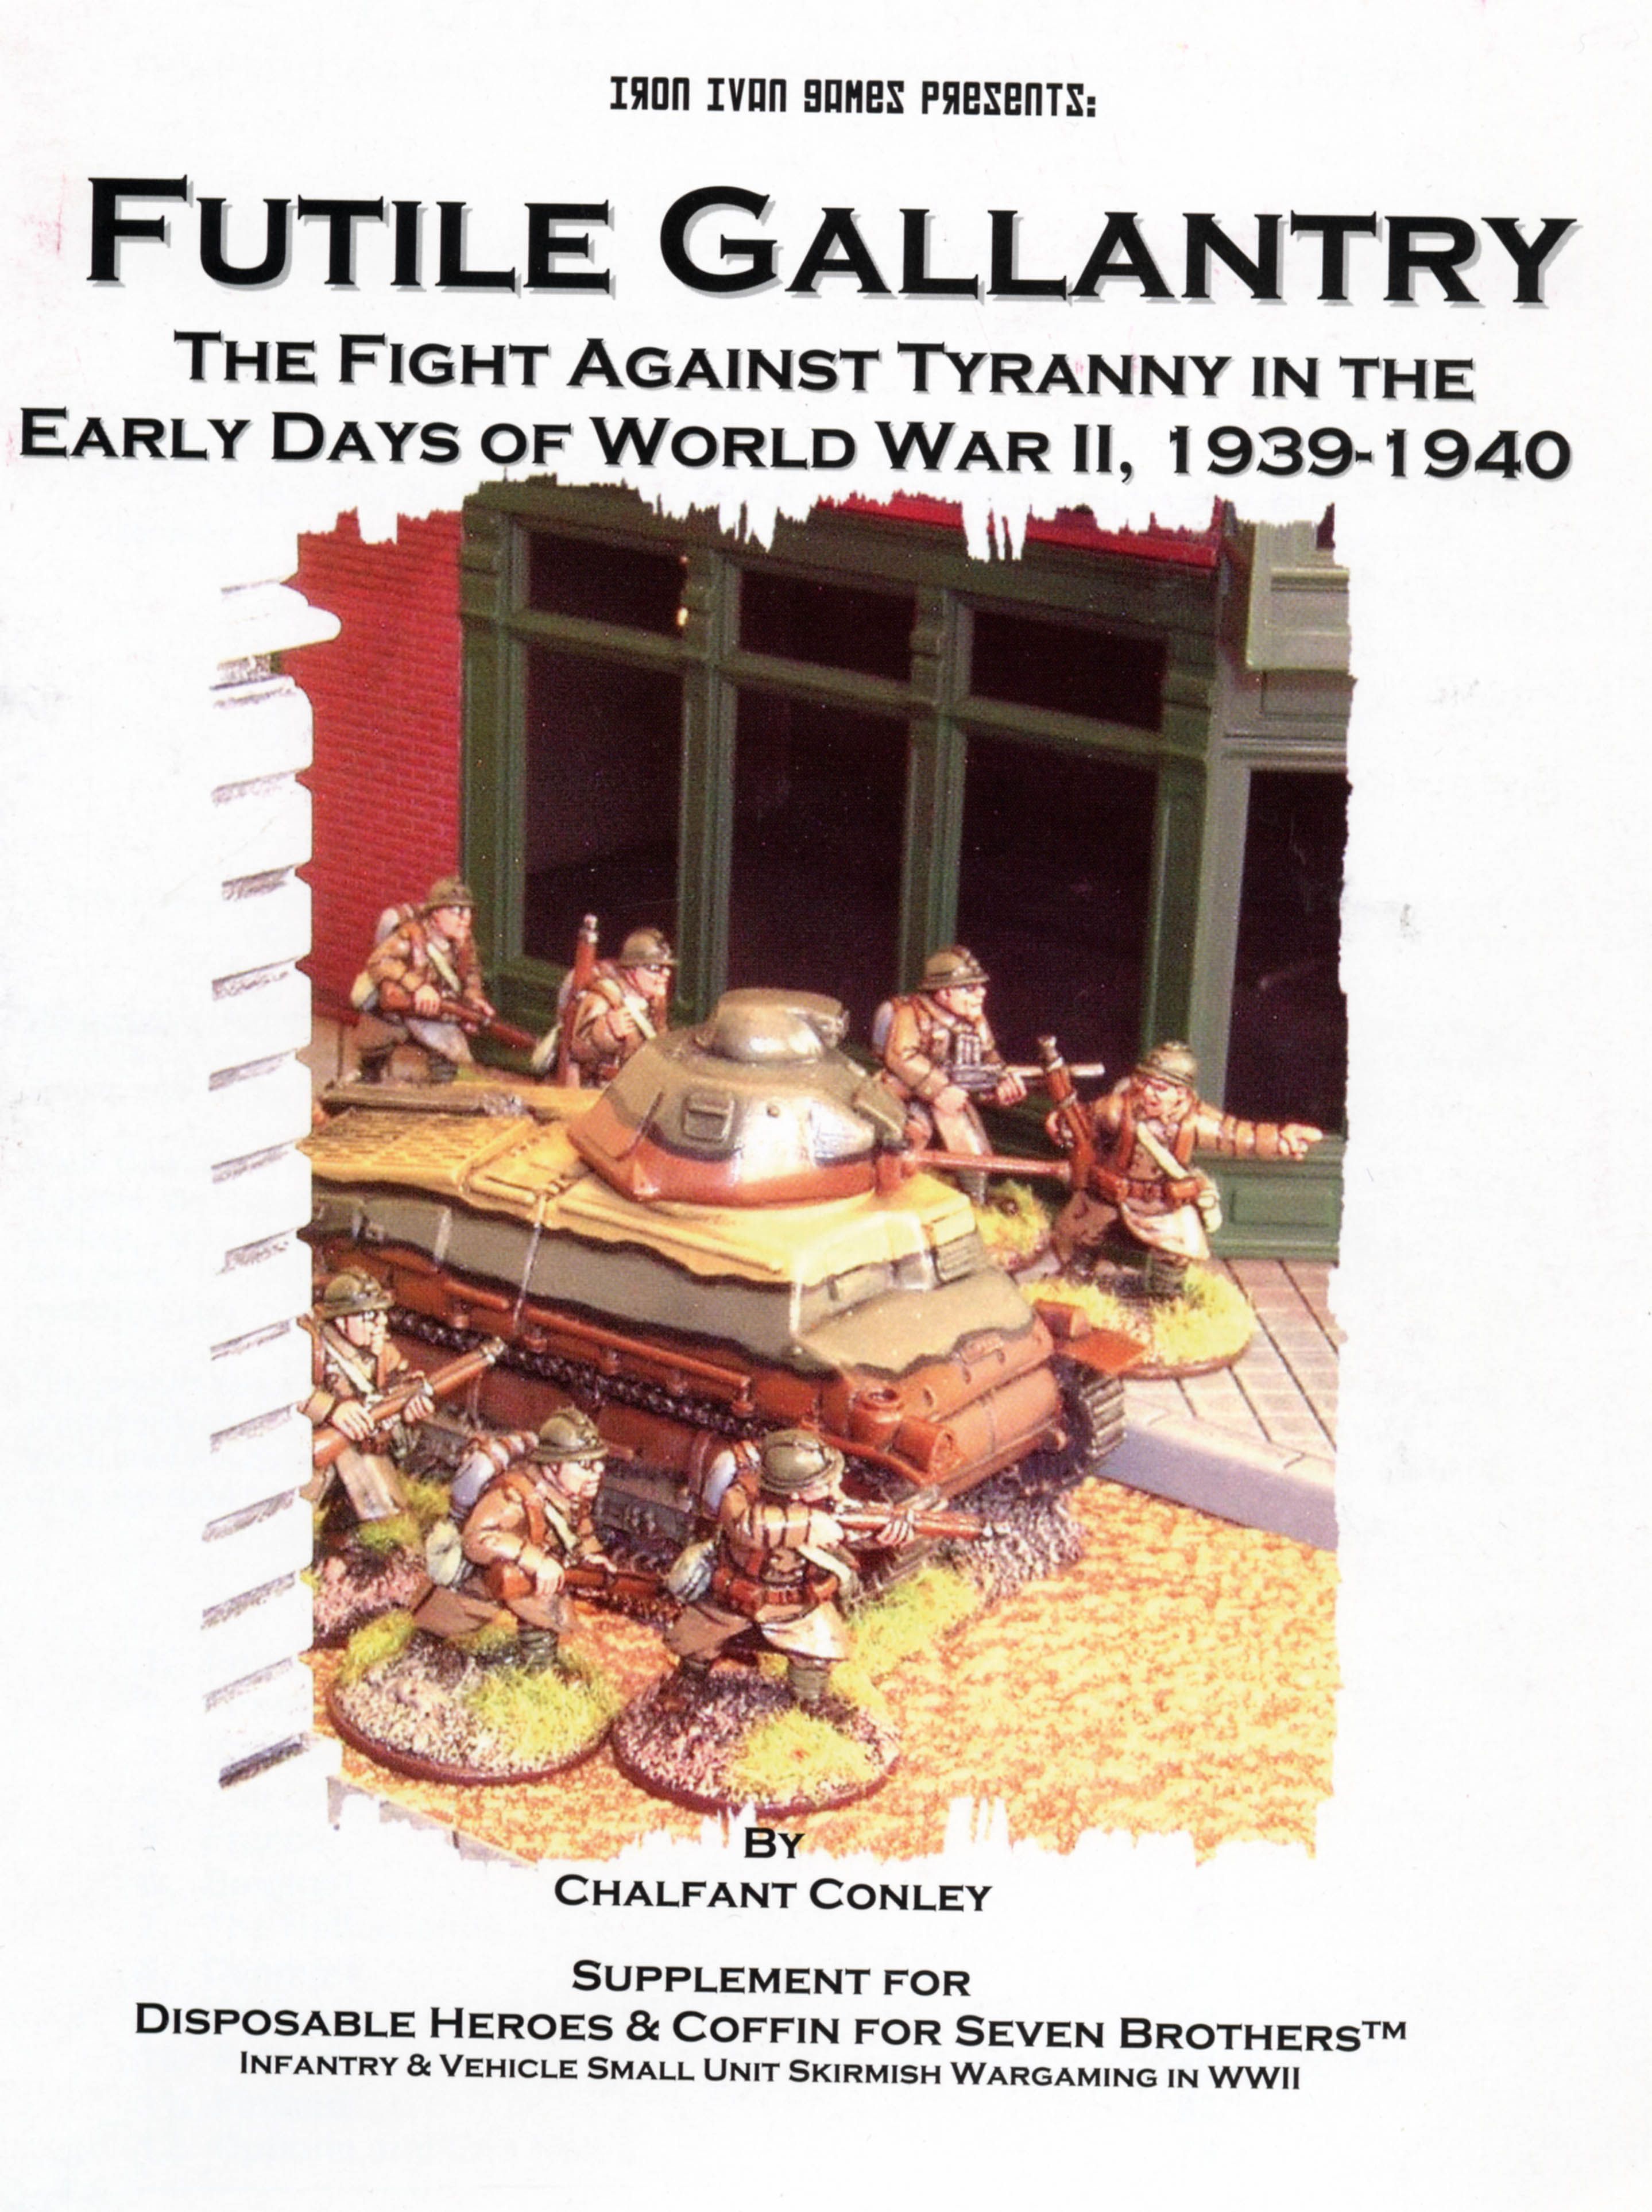 Futile Gallantry: The Fight Against Tyranny in the Early Days of World War II, 1939-1940